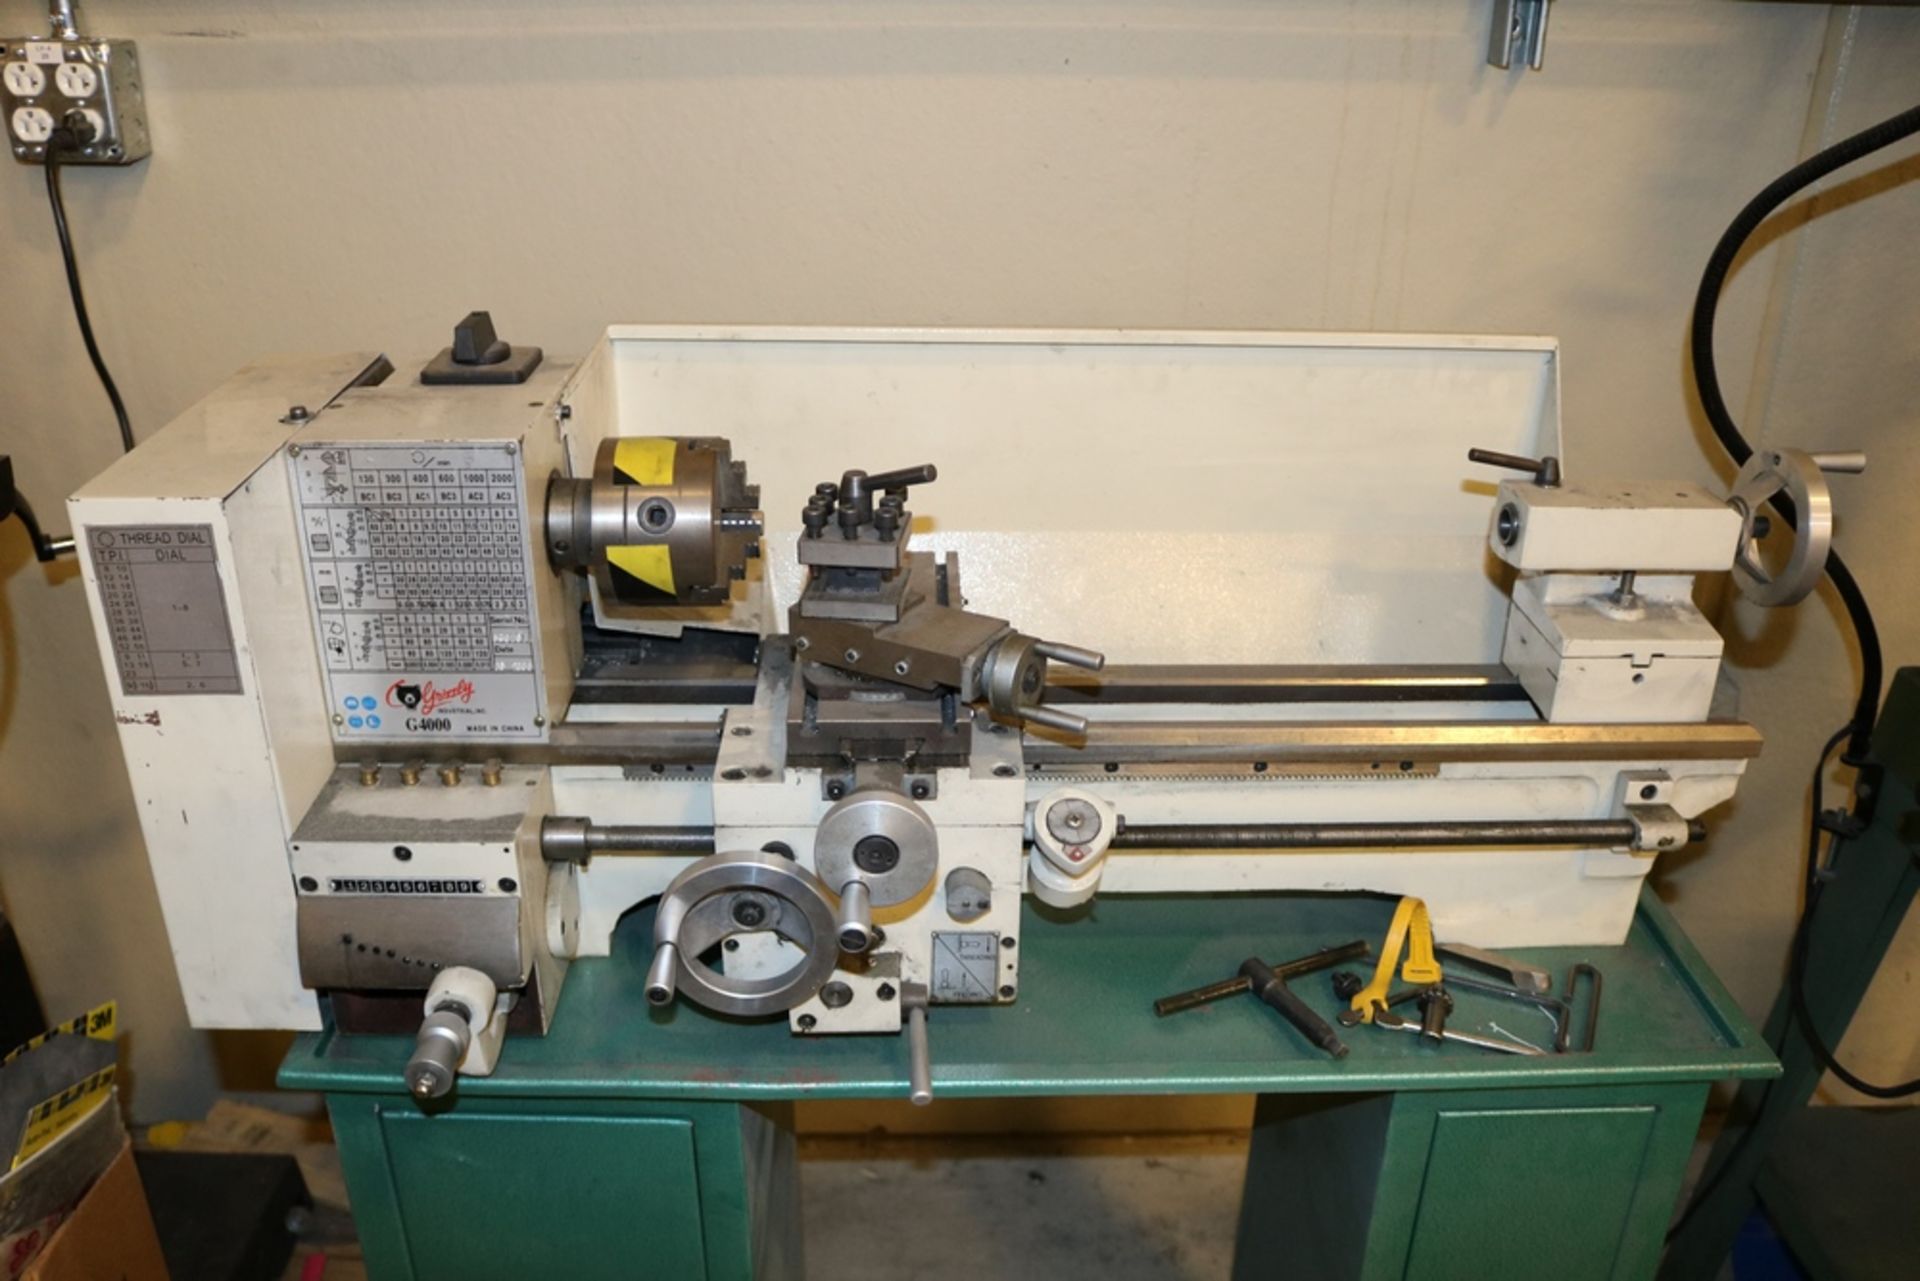 Grizzly Industrial G4000 9" x 19" Bench Lathe on Stand, 3 Jaw & 4Jaw Chuck & Others - Image 2 of 7